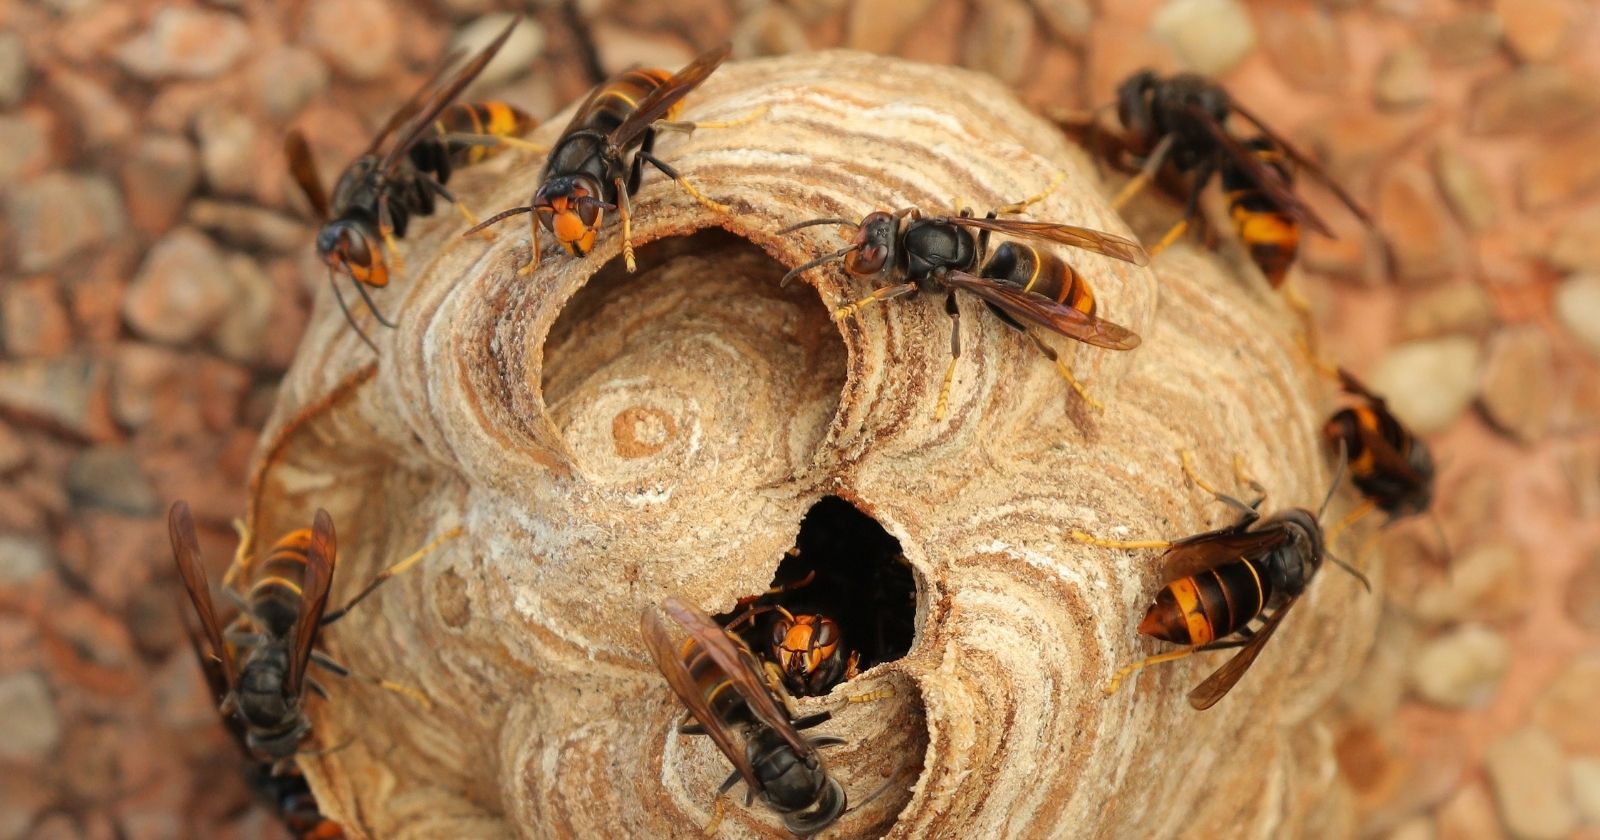 Thanks to this discovery, a new Asian hornet attack should see the light of day soon